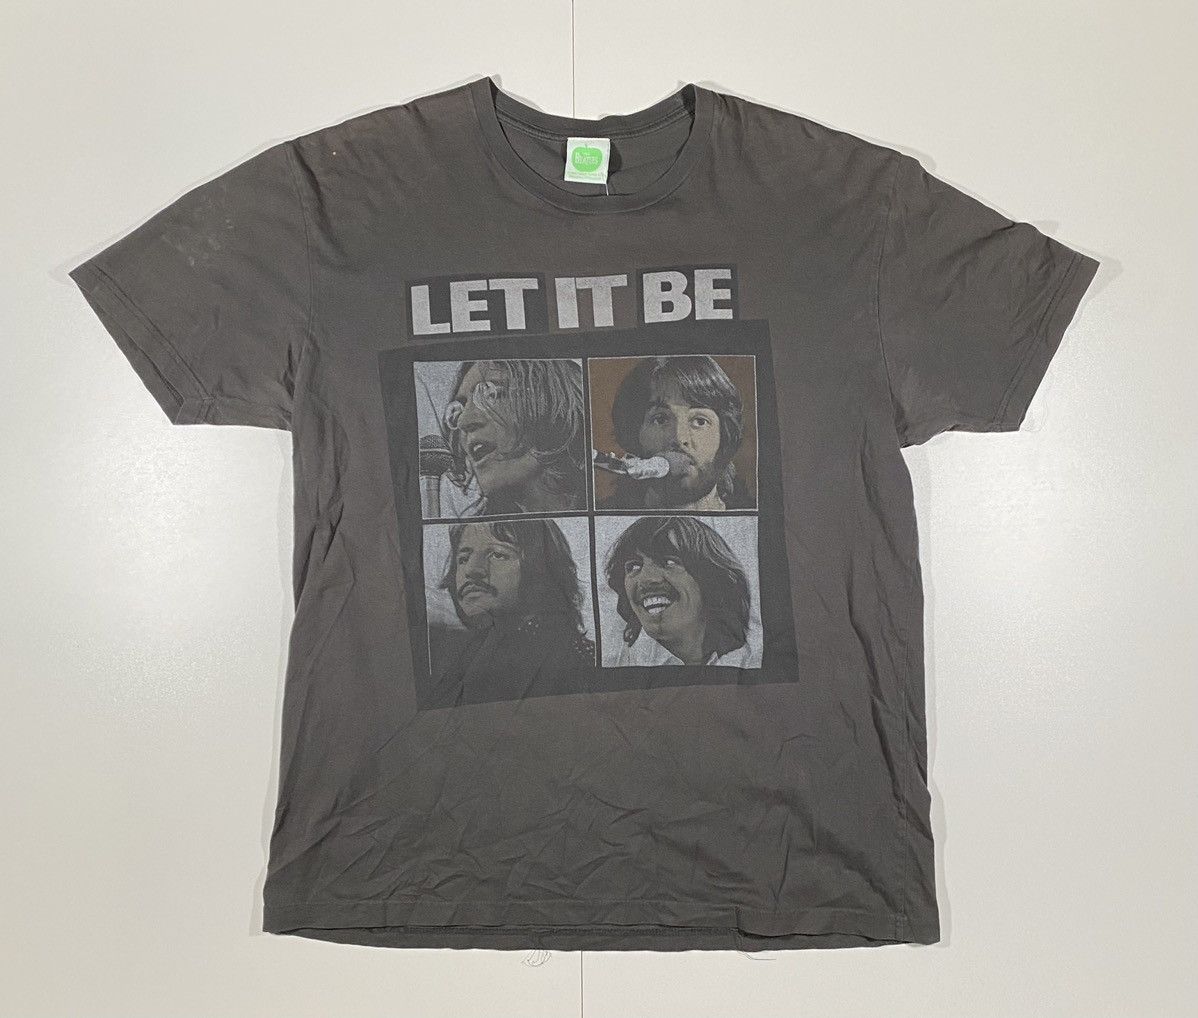 Apple The Beatles ‘05 ‘Let It Be’ Tee Size US XL / EU 56 / 4 - 1 Preview